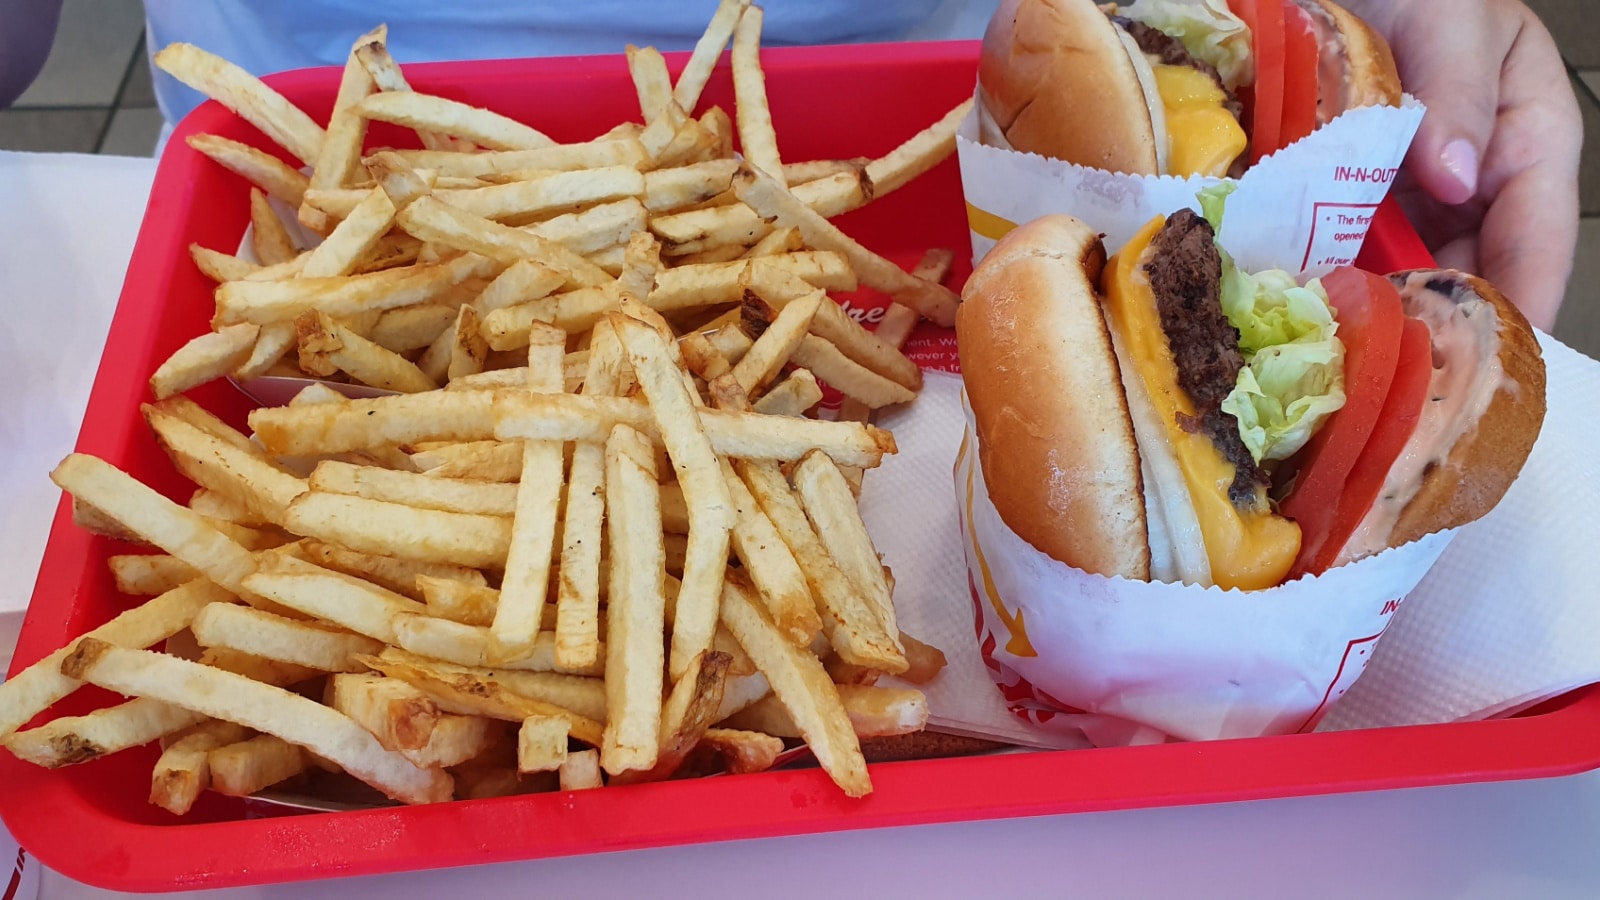 In-n-out burger, burgers and fries in San Francisco, California, USA - September 8, 2019